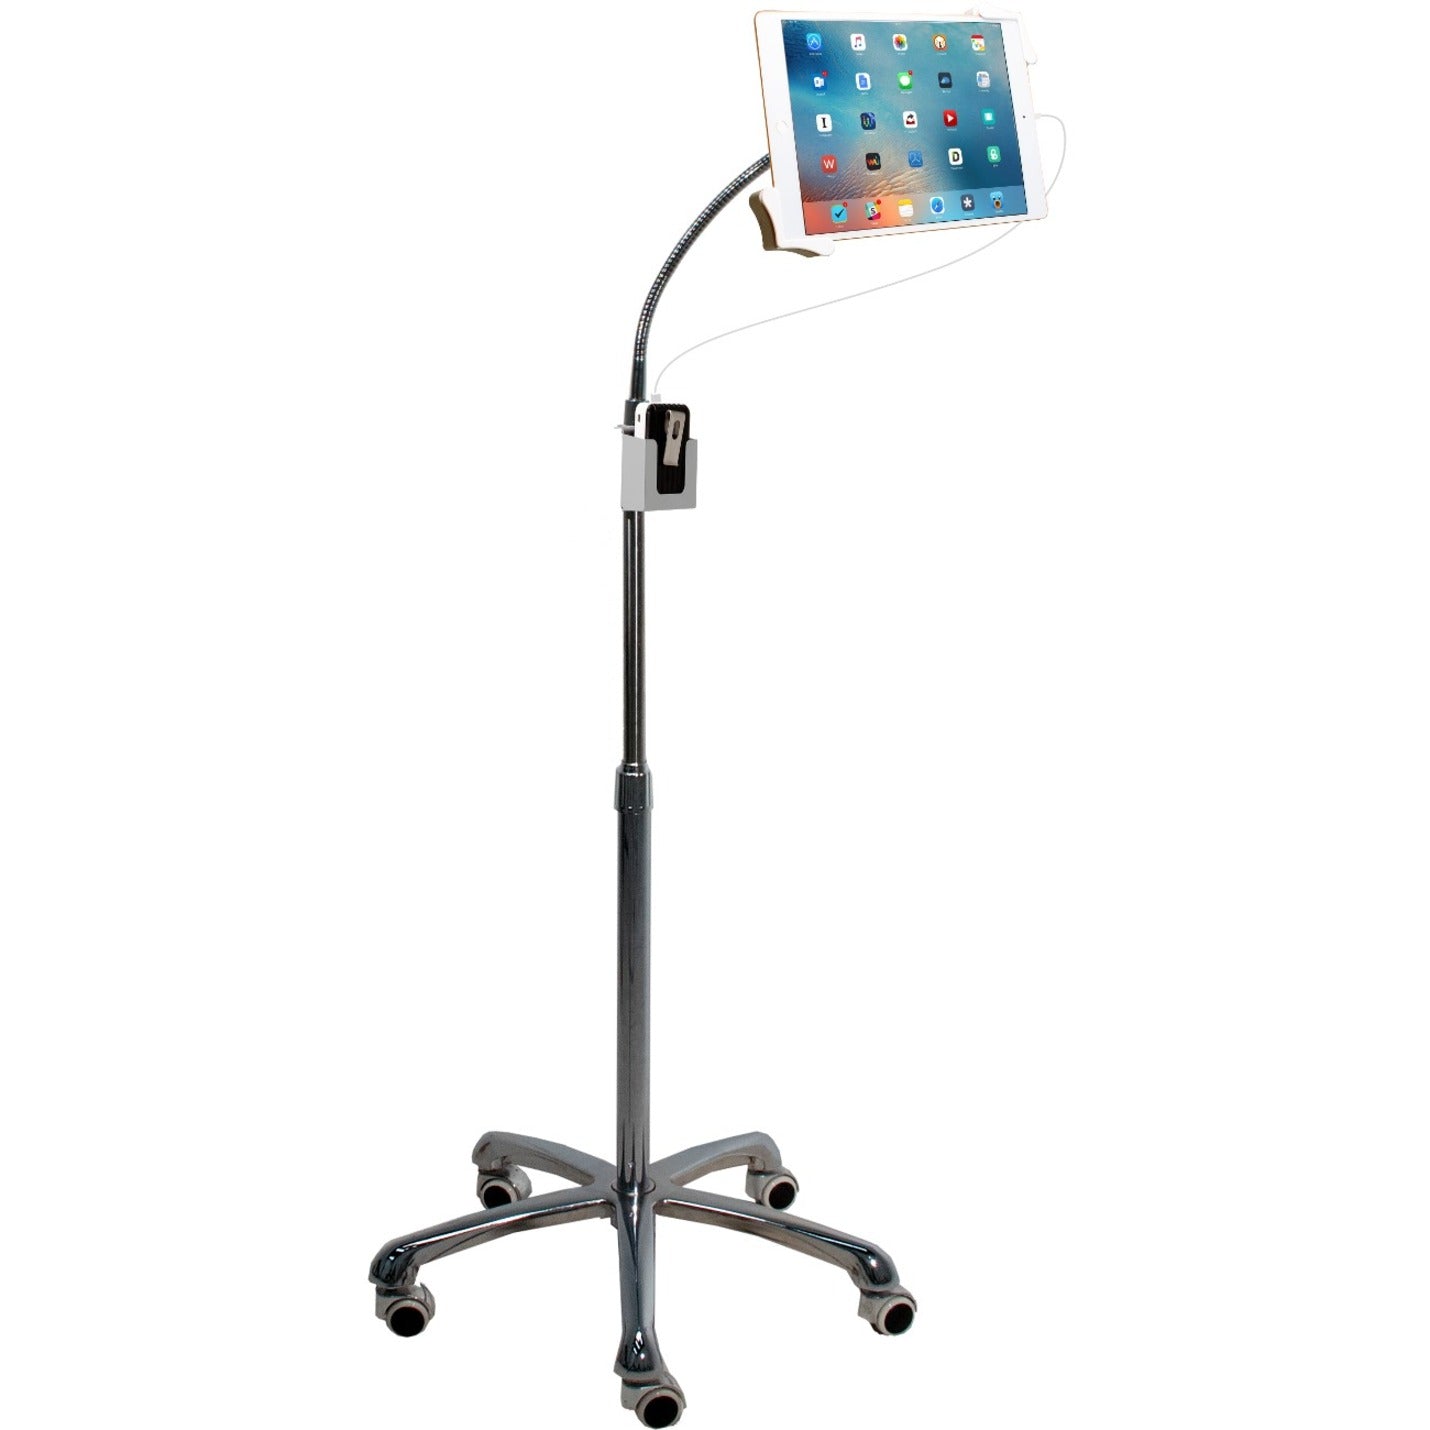 CTA Digital PAD-HFS Heavy-Duty Gooseneck Floor Stand for 7-13 Inch Tablets, Height Adjustable, 360° Rotation, Mobility, Swivel Casters